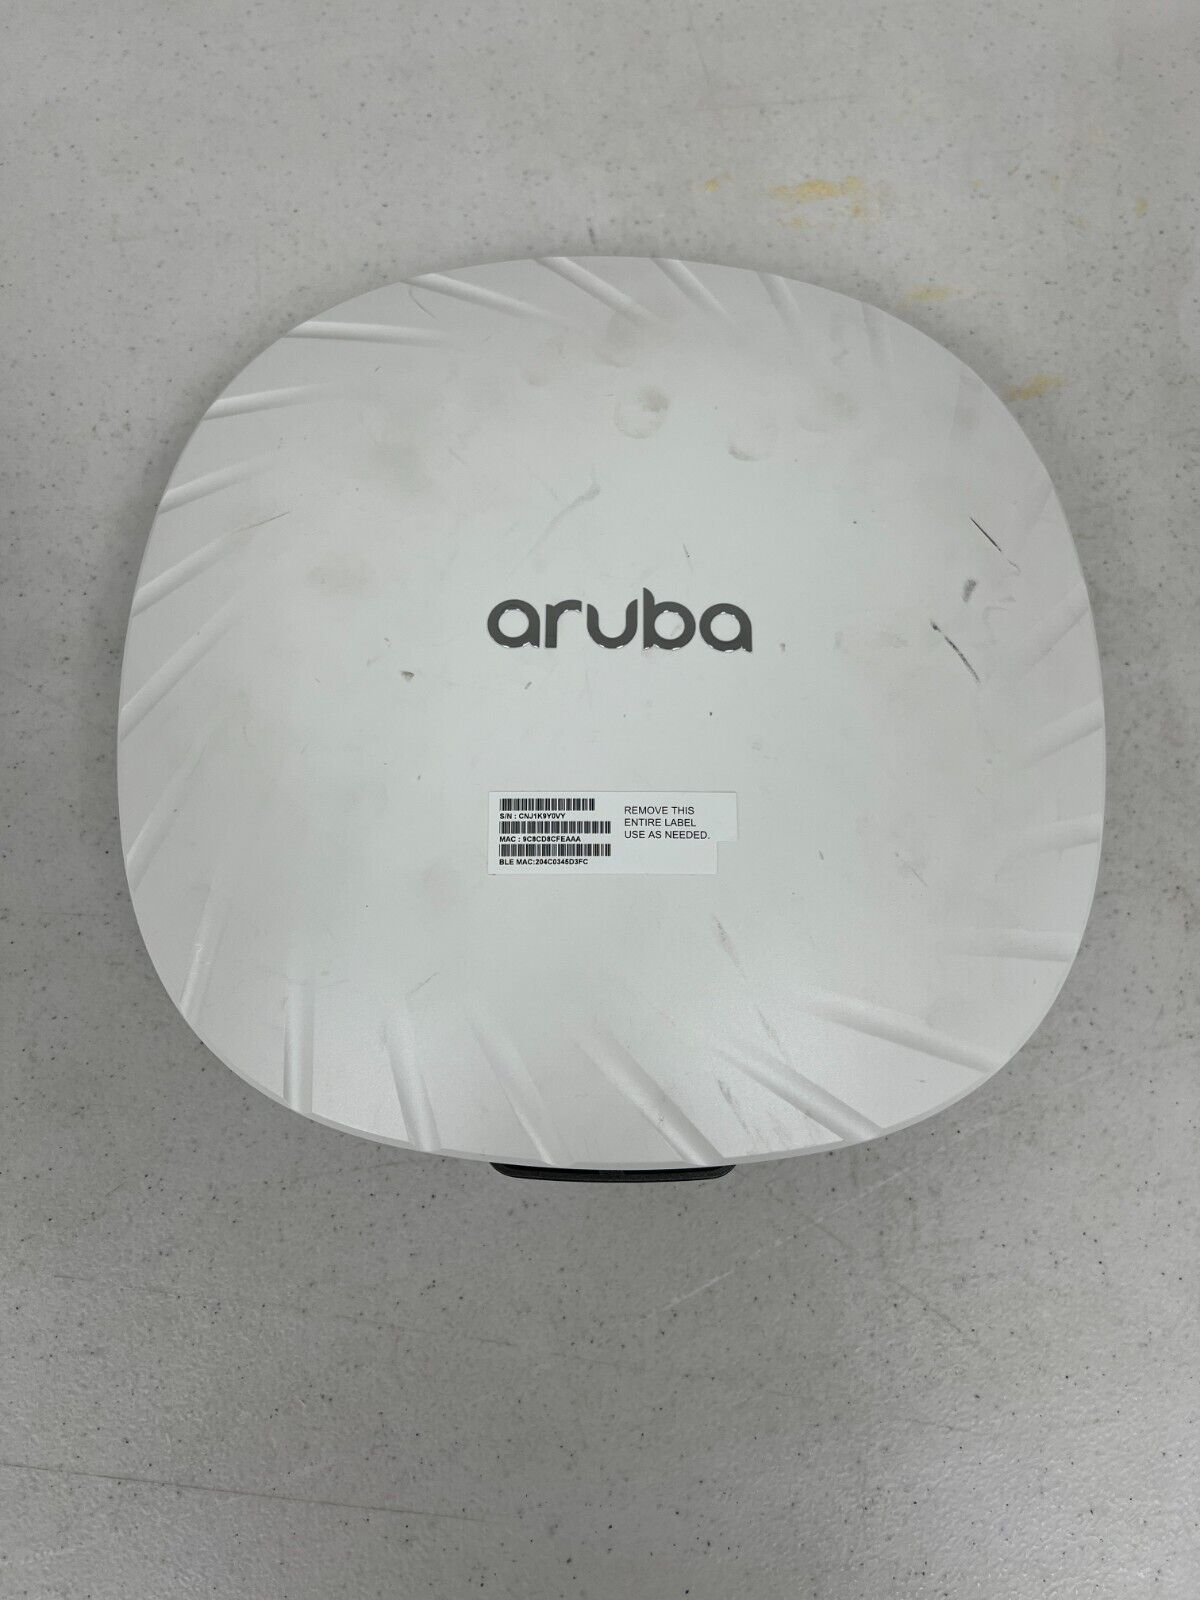 ARUBA JZ357A AP-555-US DUAL RADIO UNIFIED WIRELESS ACCESS POINT (PRE OWNED)